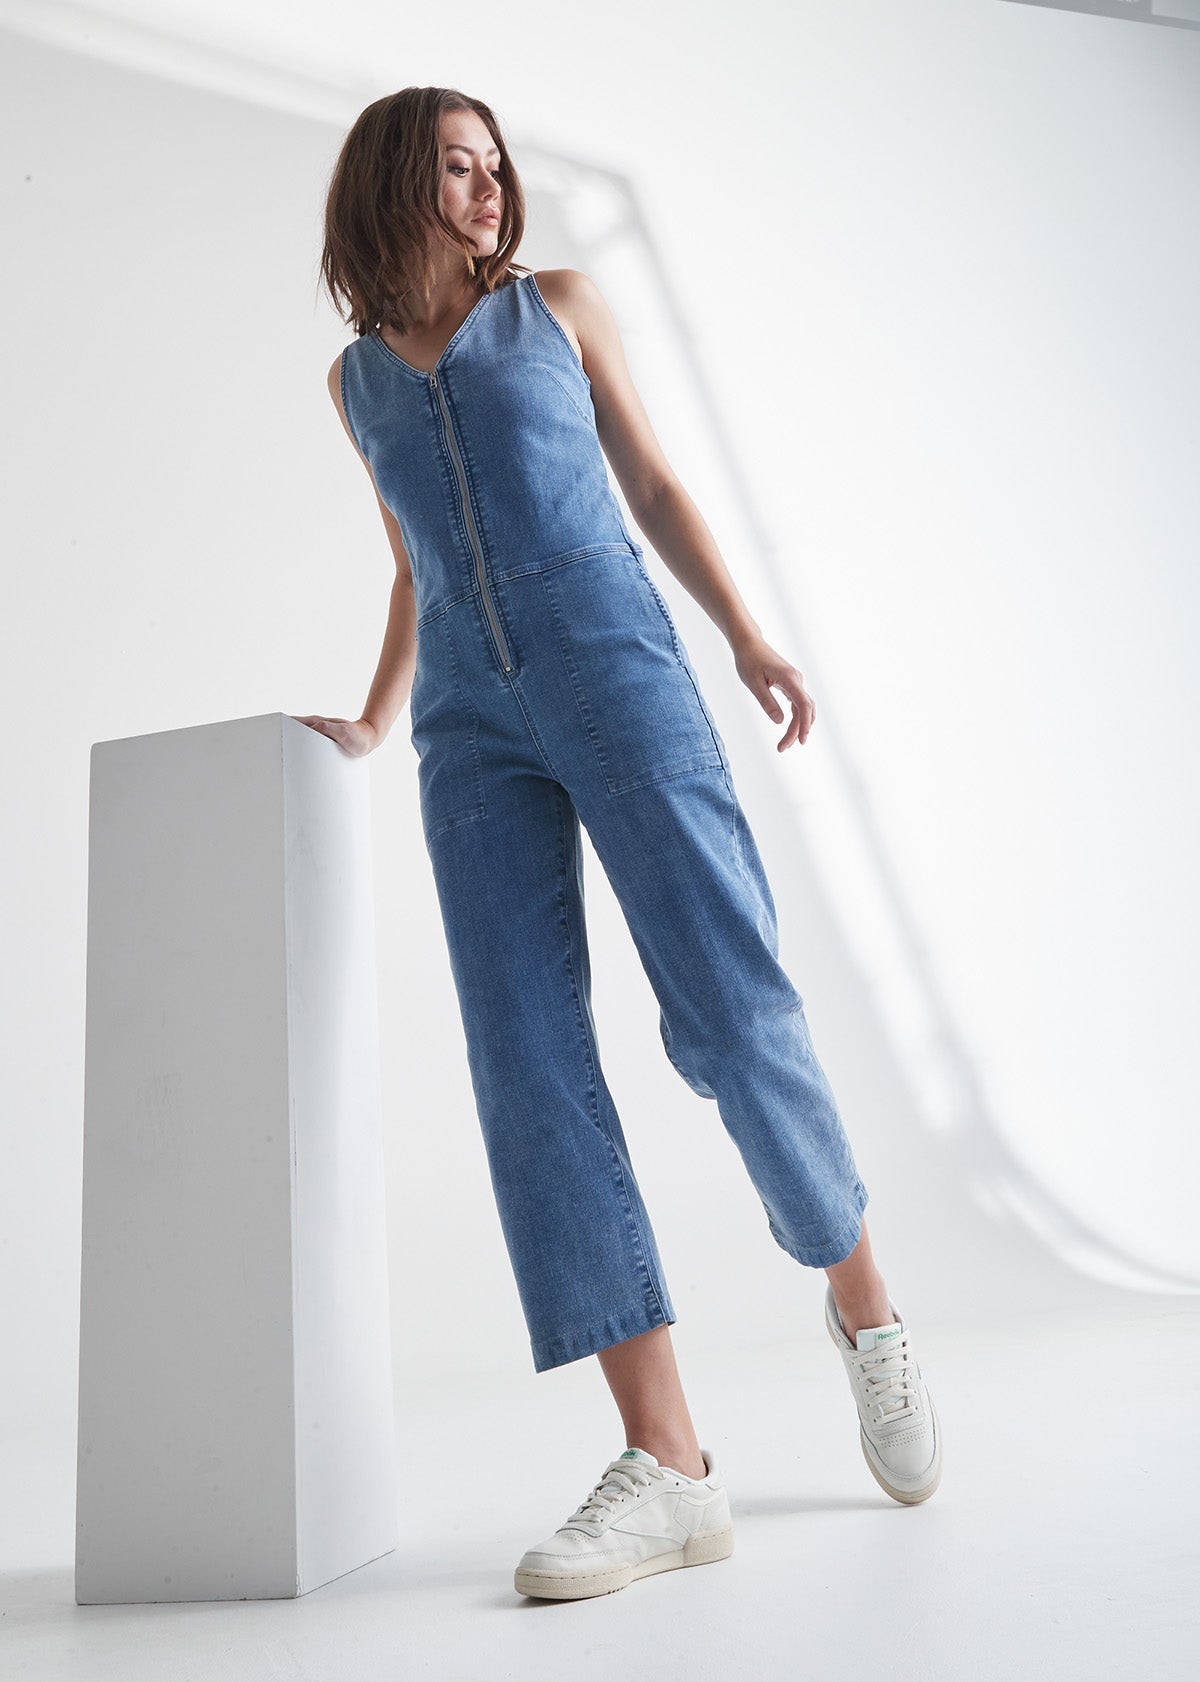 Fashion Washed Denim Overalls Ripped New Jumpsuit Rompers Women Jeans -  China Clothes and Clothing price